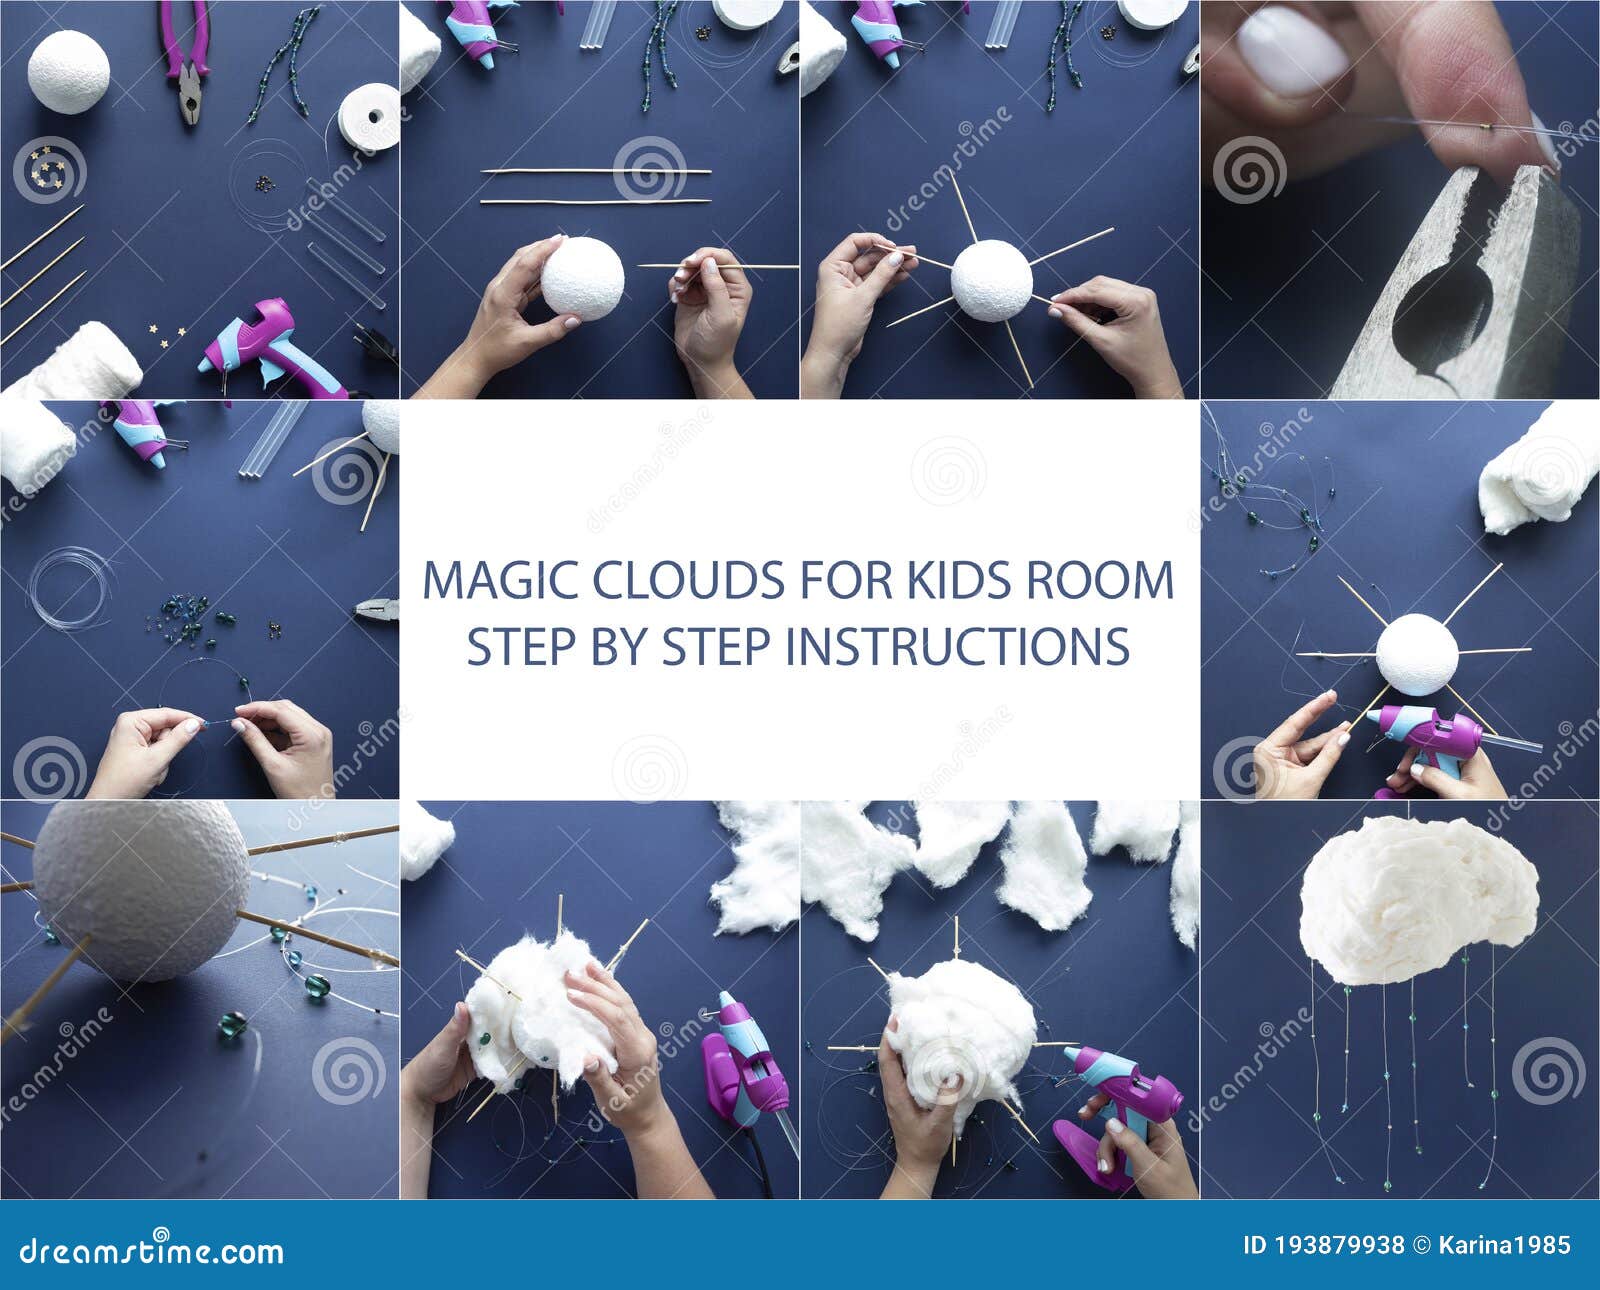 How To Make Cotton Clouds for Kids Room. Step by Step Instructions ...